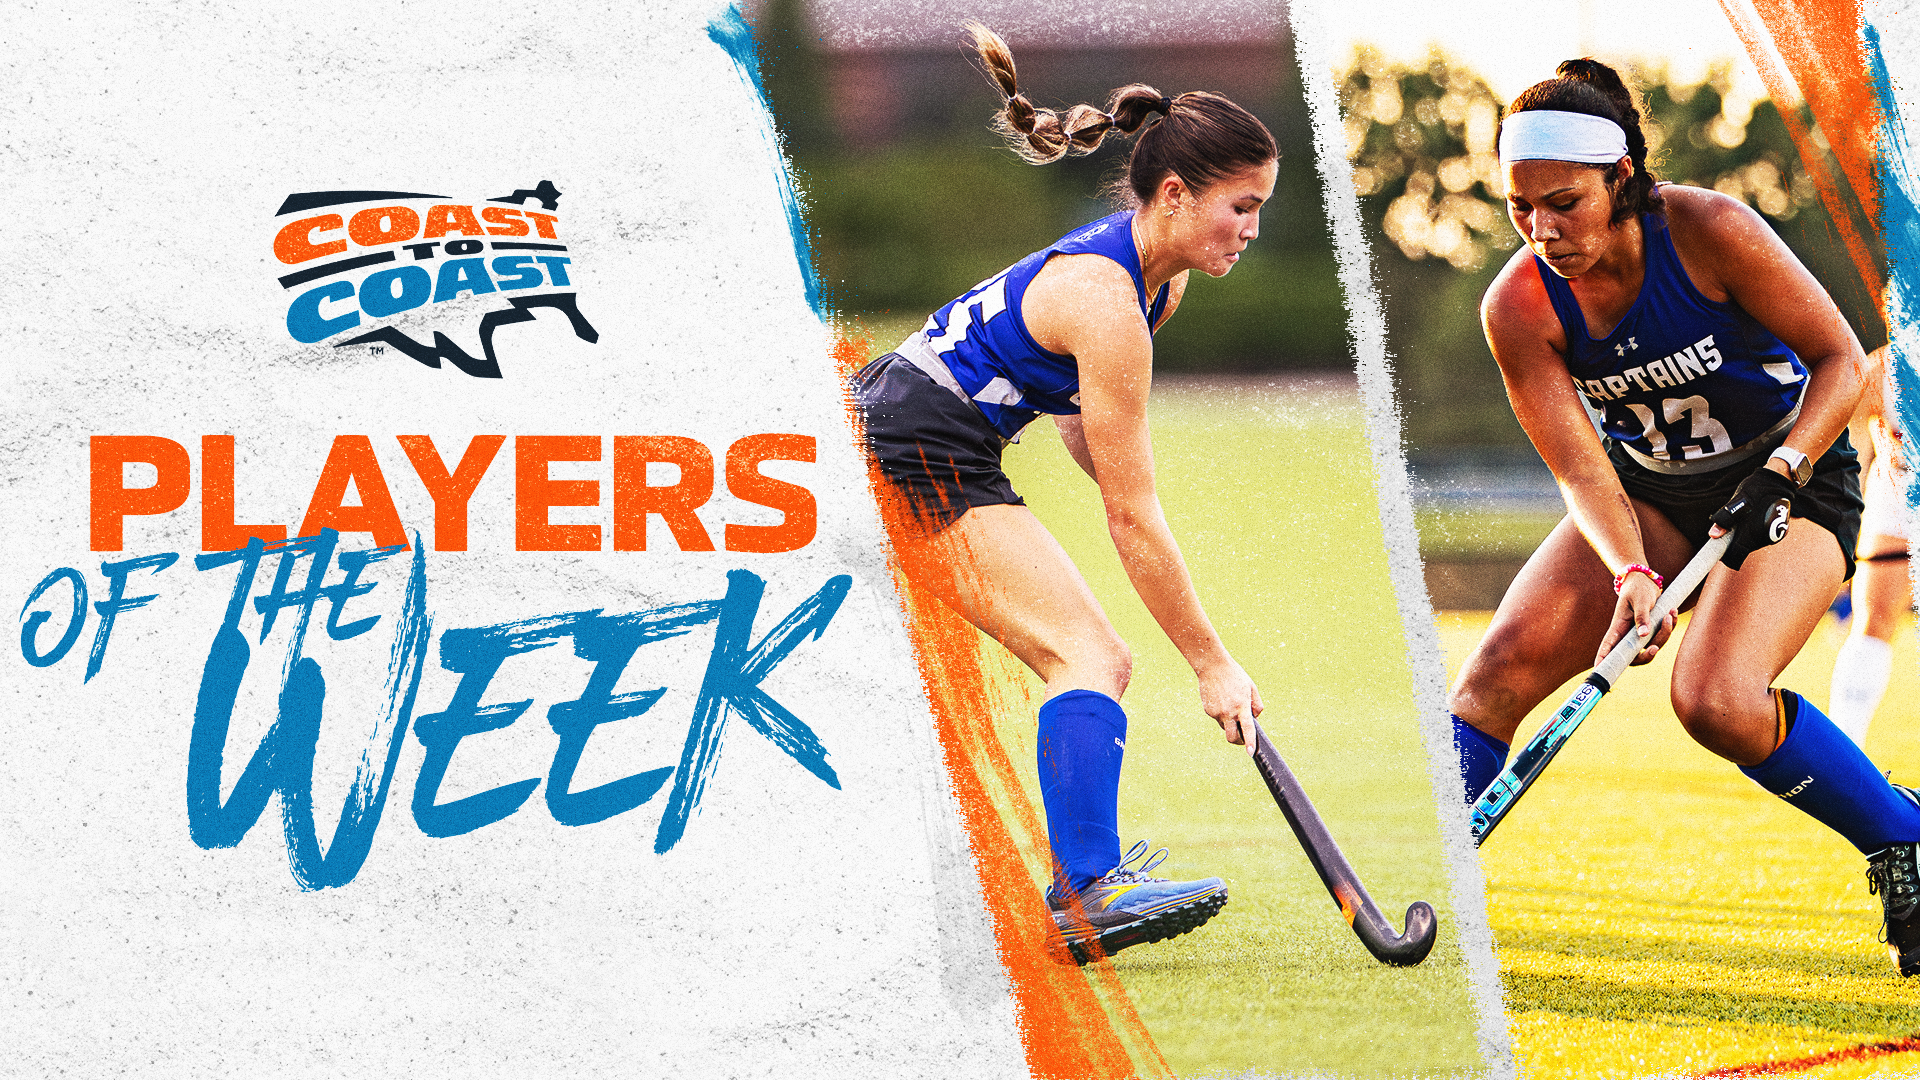 Christopher Newport’s Asuncion, Morales Earn C2C Field Hockey Player of the Week Accolades